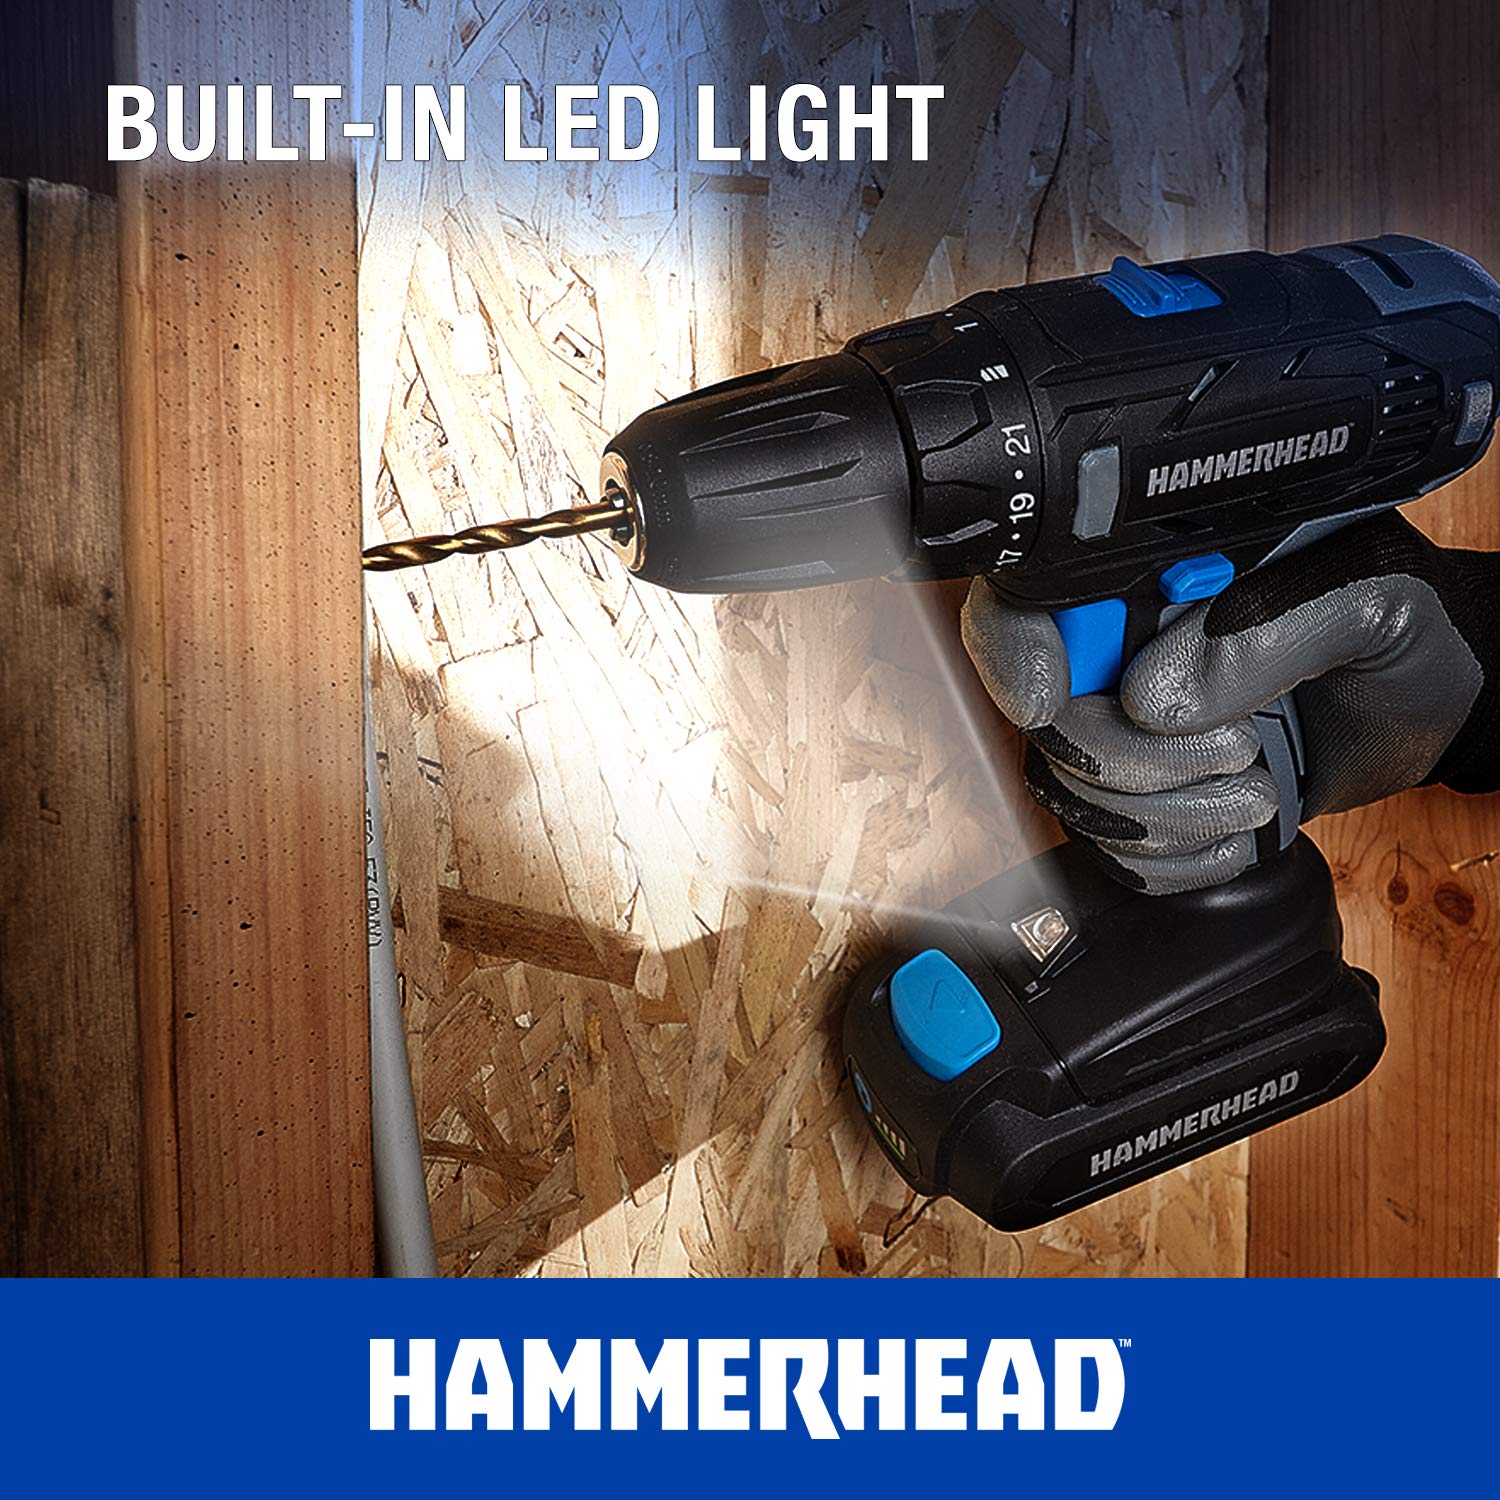 Hammerhead 20V 2-Speed Cordless Drill Driver Kit with 1.5Ah Battery and Charger - HCDD201